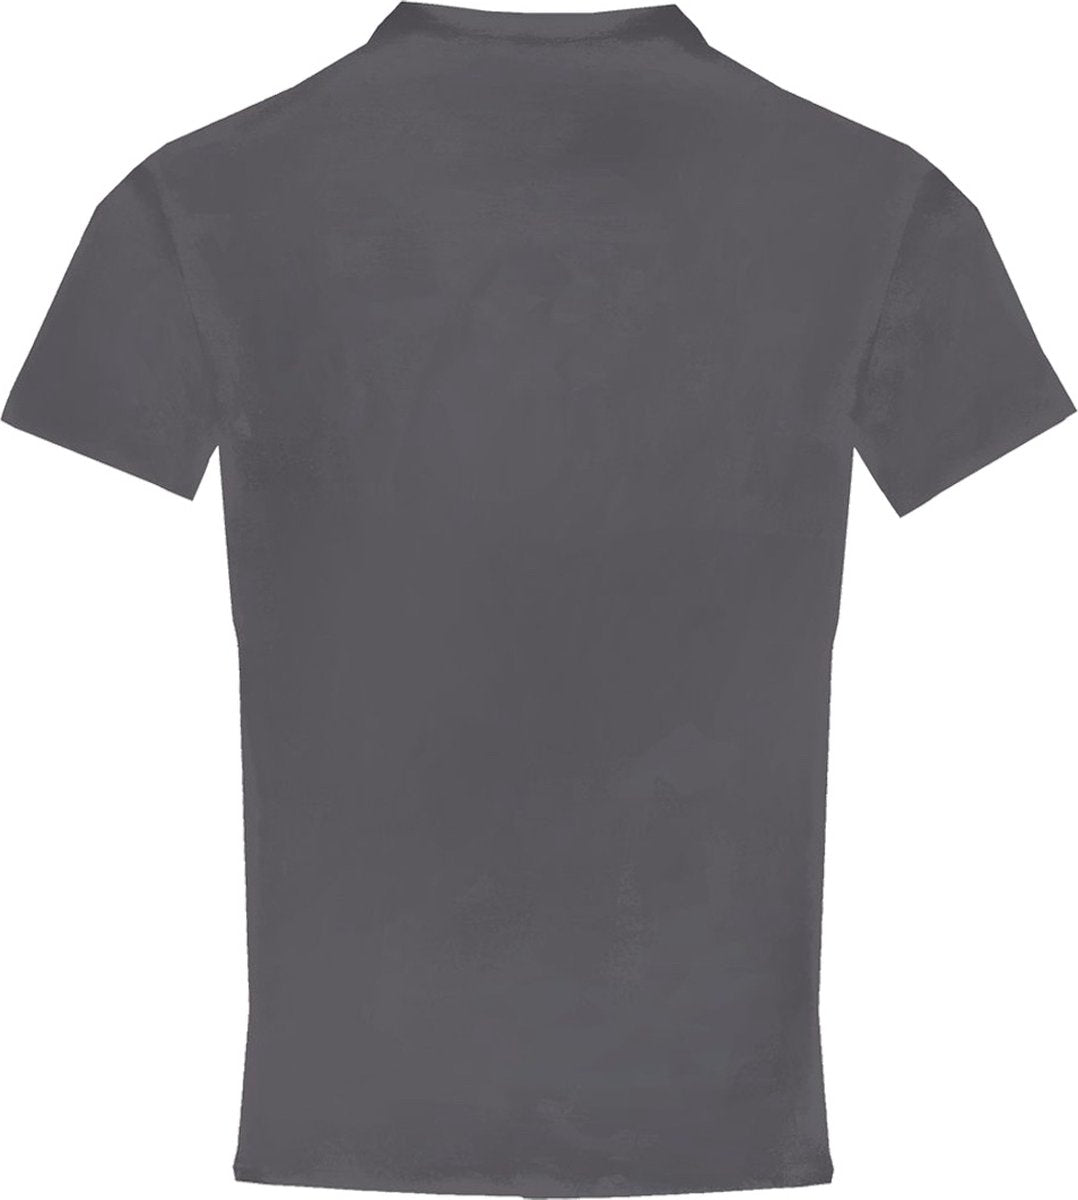 Shirt With Short Sleeves - Pro Compression - Men's Underhirt